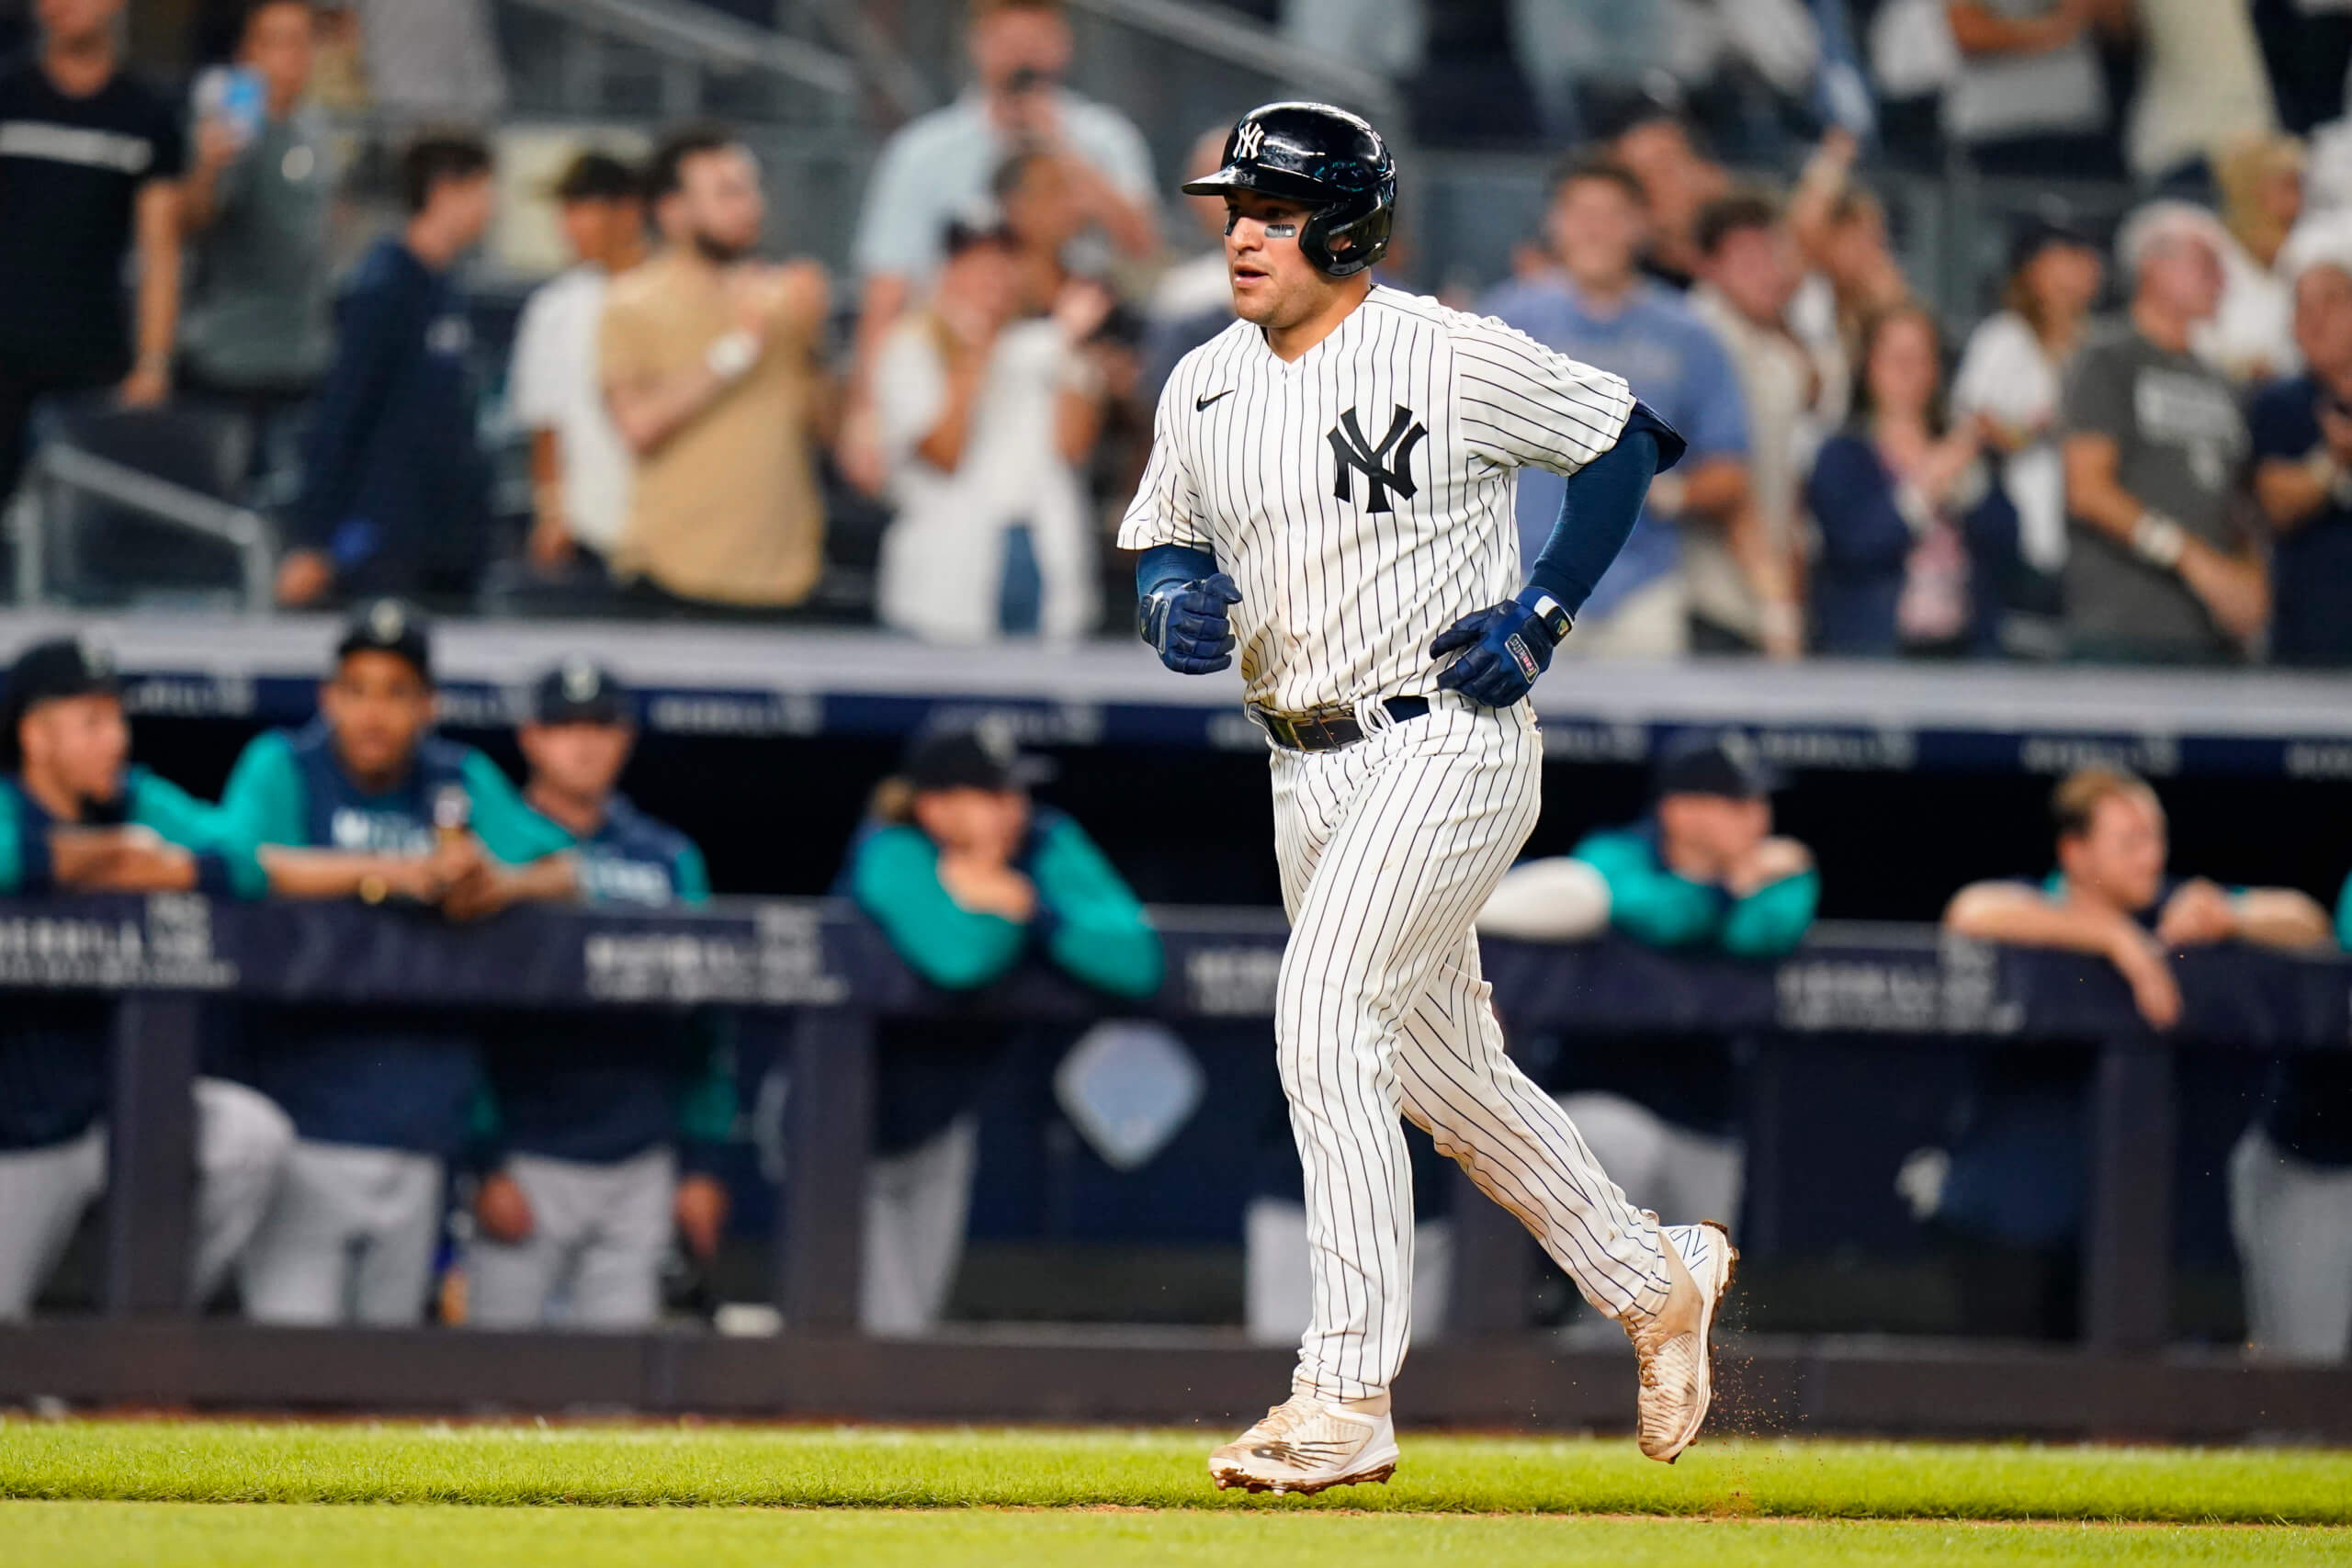 Yankees' Jose Trevino embracing excitement in MLB playoff debut in